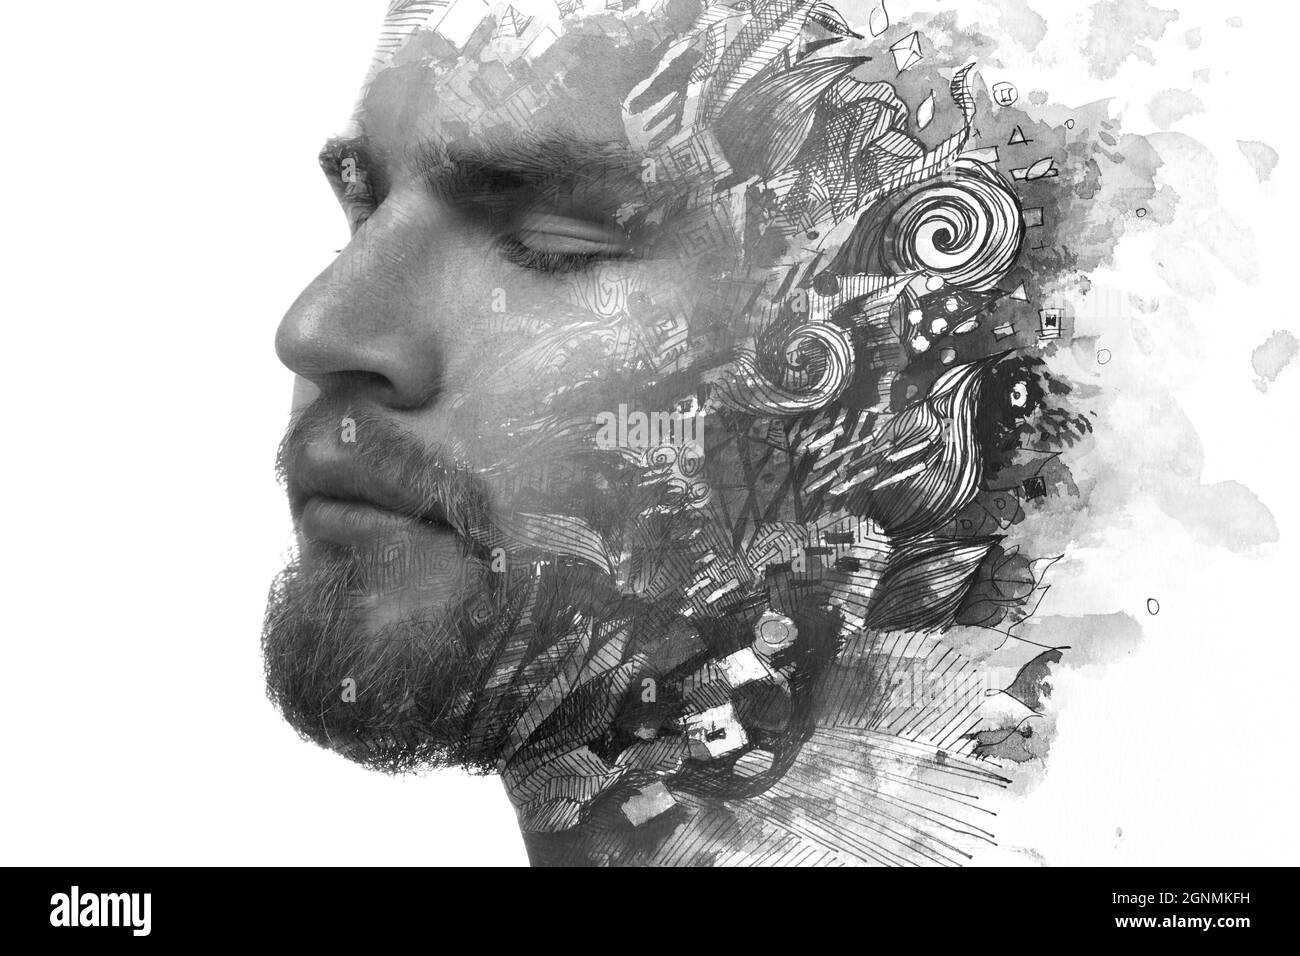 Paintography. Mental health concept depicted in an unusual portrait. Stock Photo